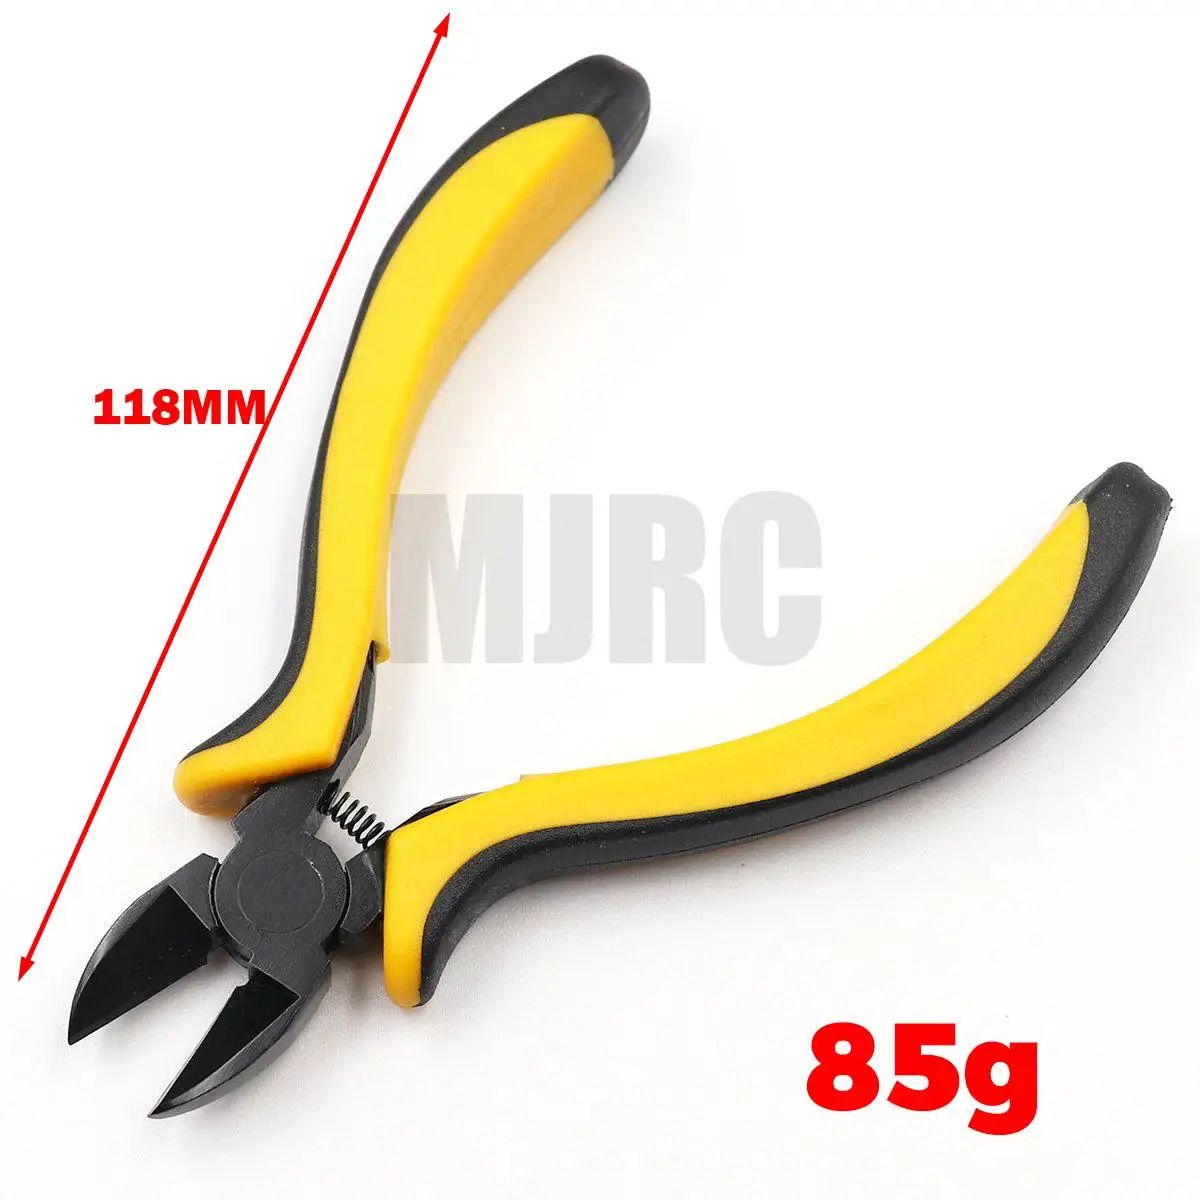 B9 Ball Head Tool Ball Link Clamp Plier for RC Helicopter Aeroplane Plane Car H5 for sale online 